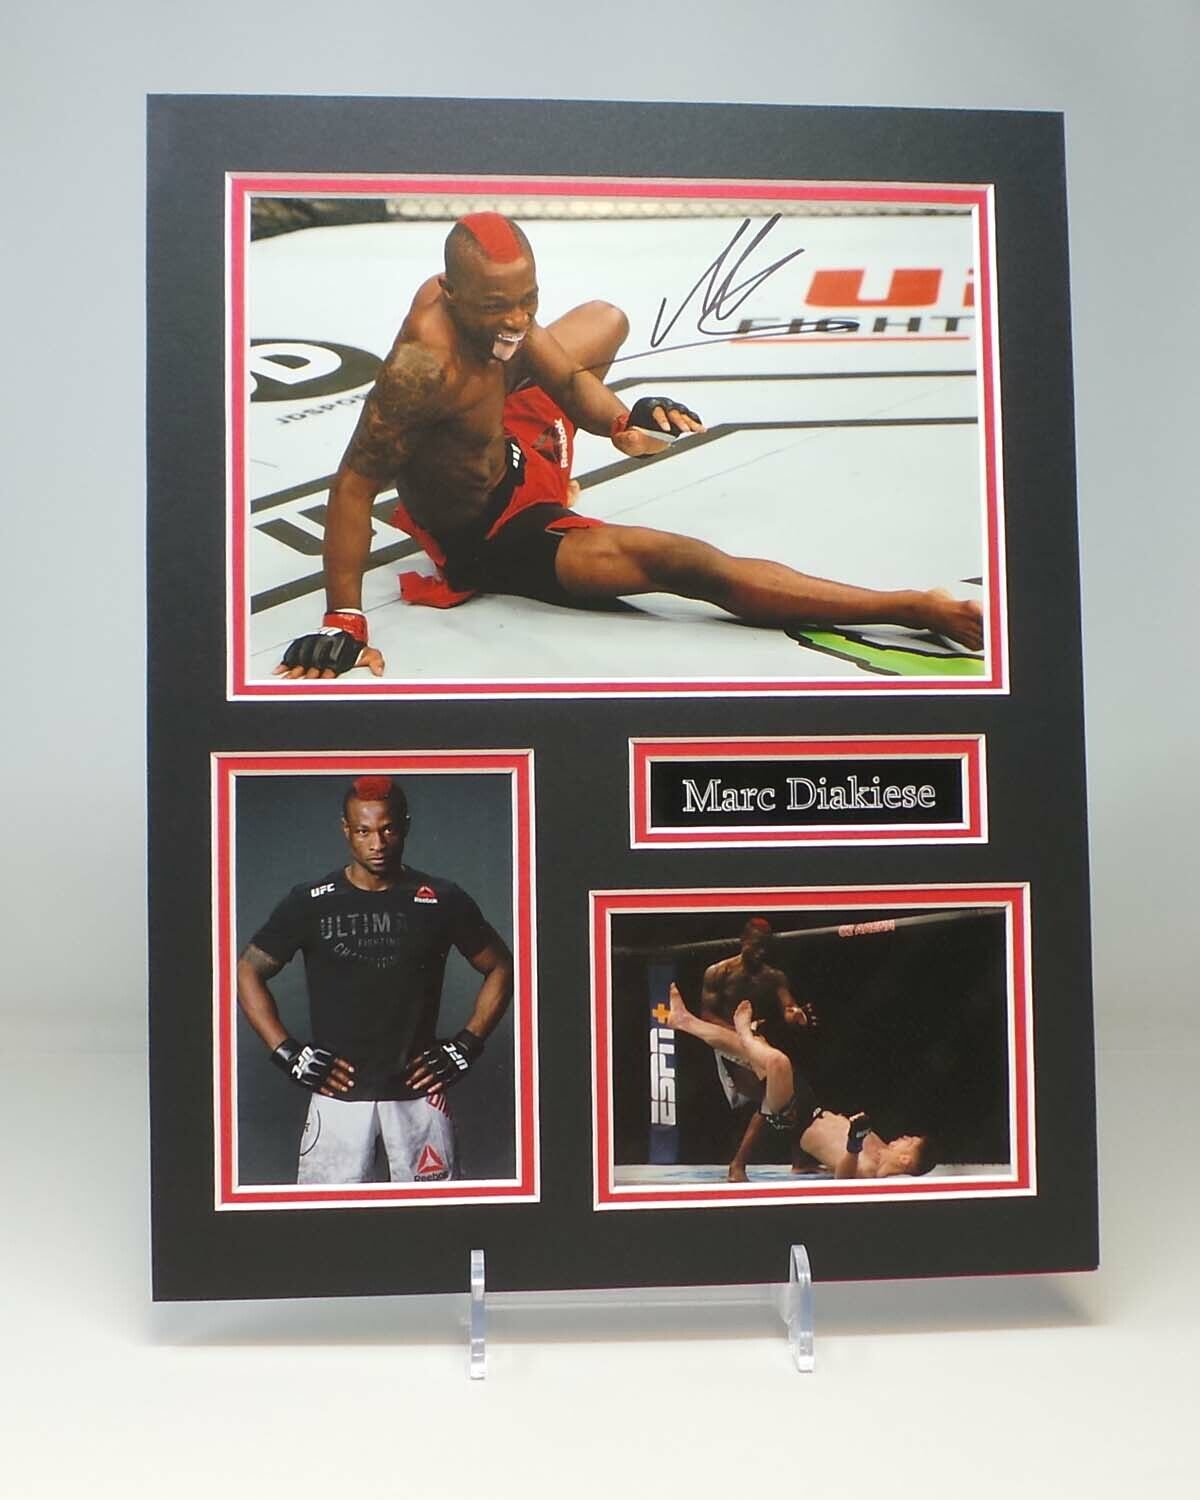 Marc Bonecrusher DIAKIESE Signed Mounted Photo Poster painting Display AFTAL RD COA MMA Fighter